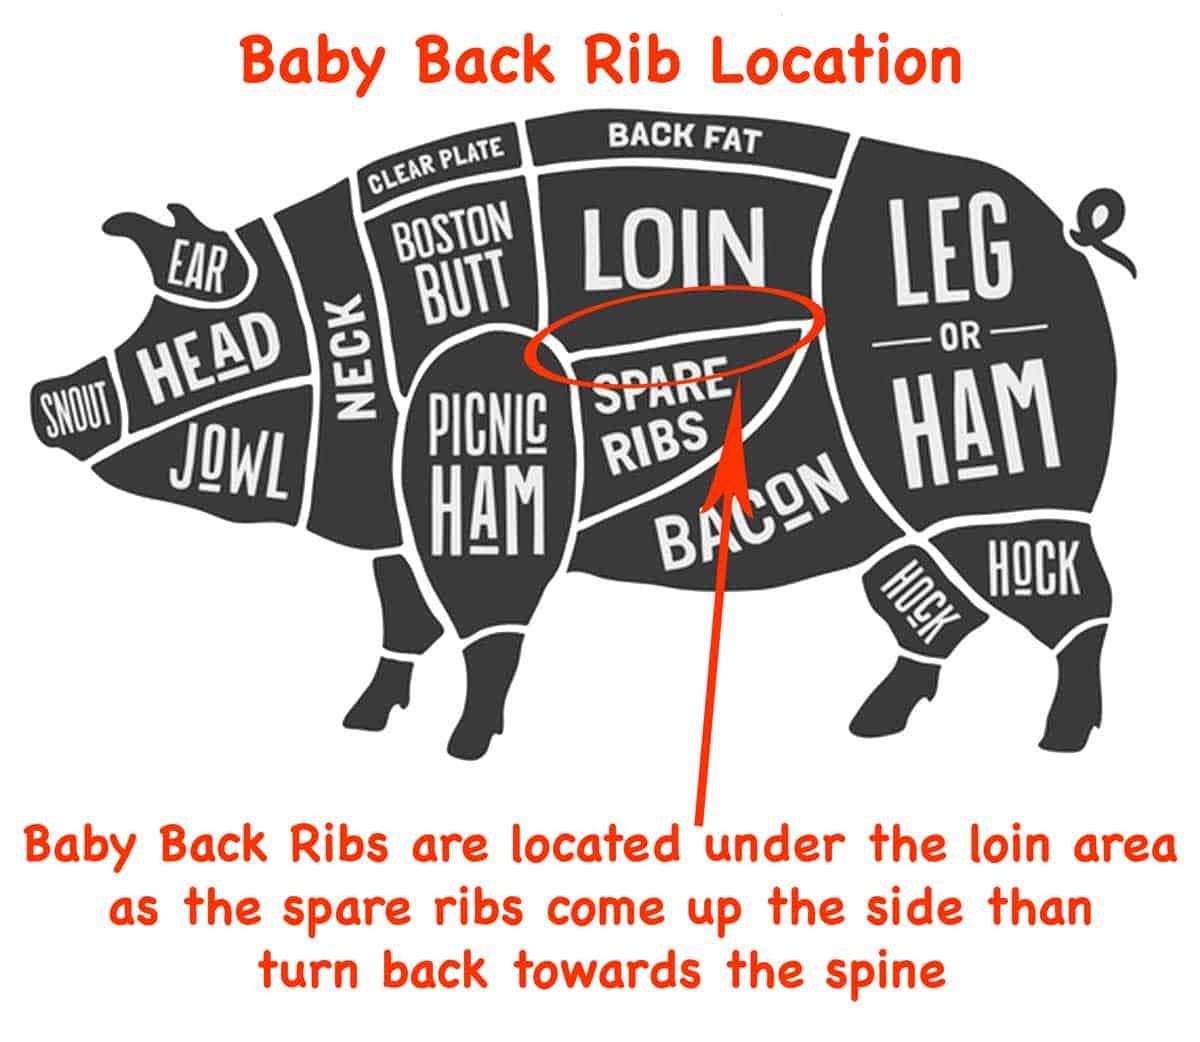 graph showing location of baby back ribs - Image licensed May 17, 2017, from Fotolia. Copyright by foxysgraphic - Fotolia. Image modified in accordance with the license.